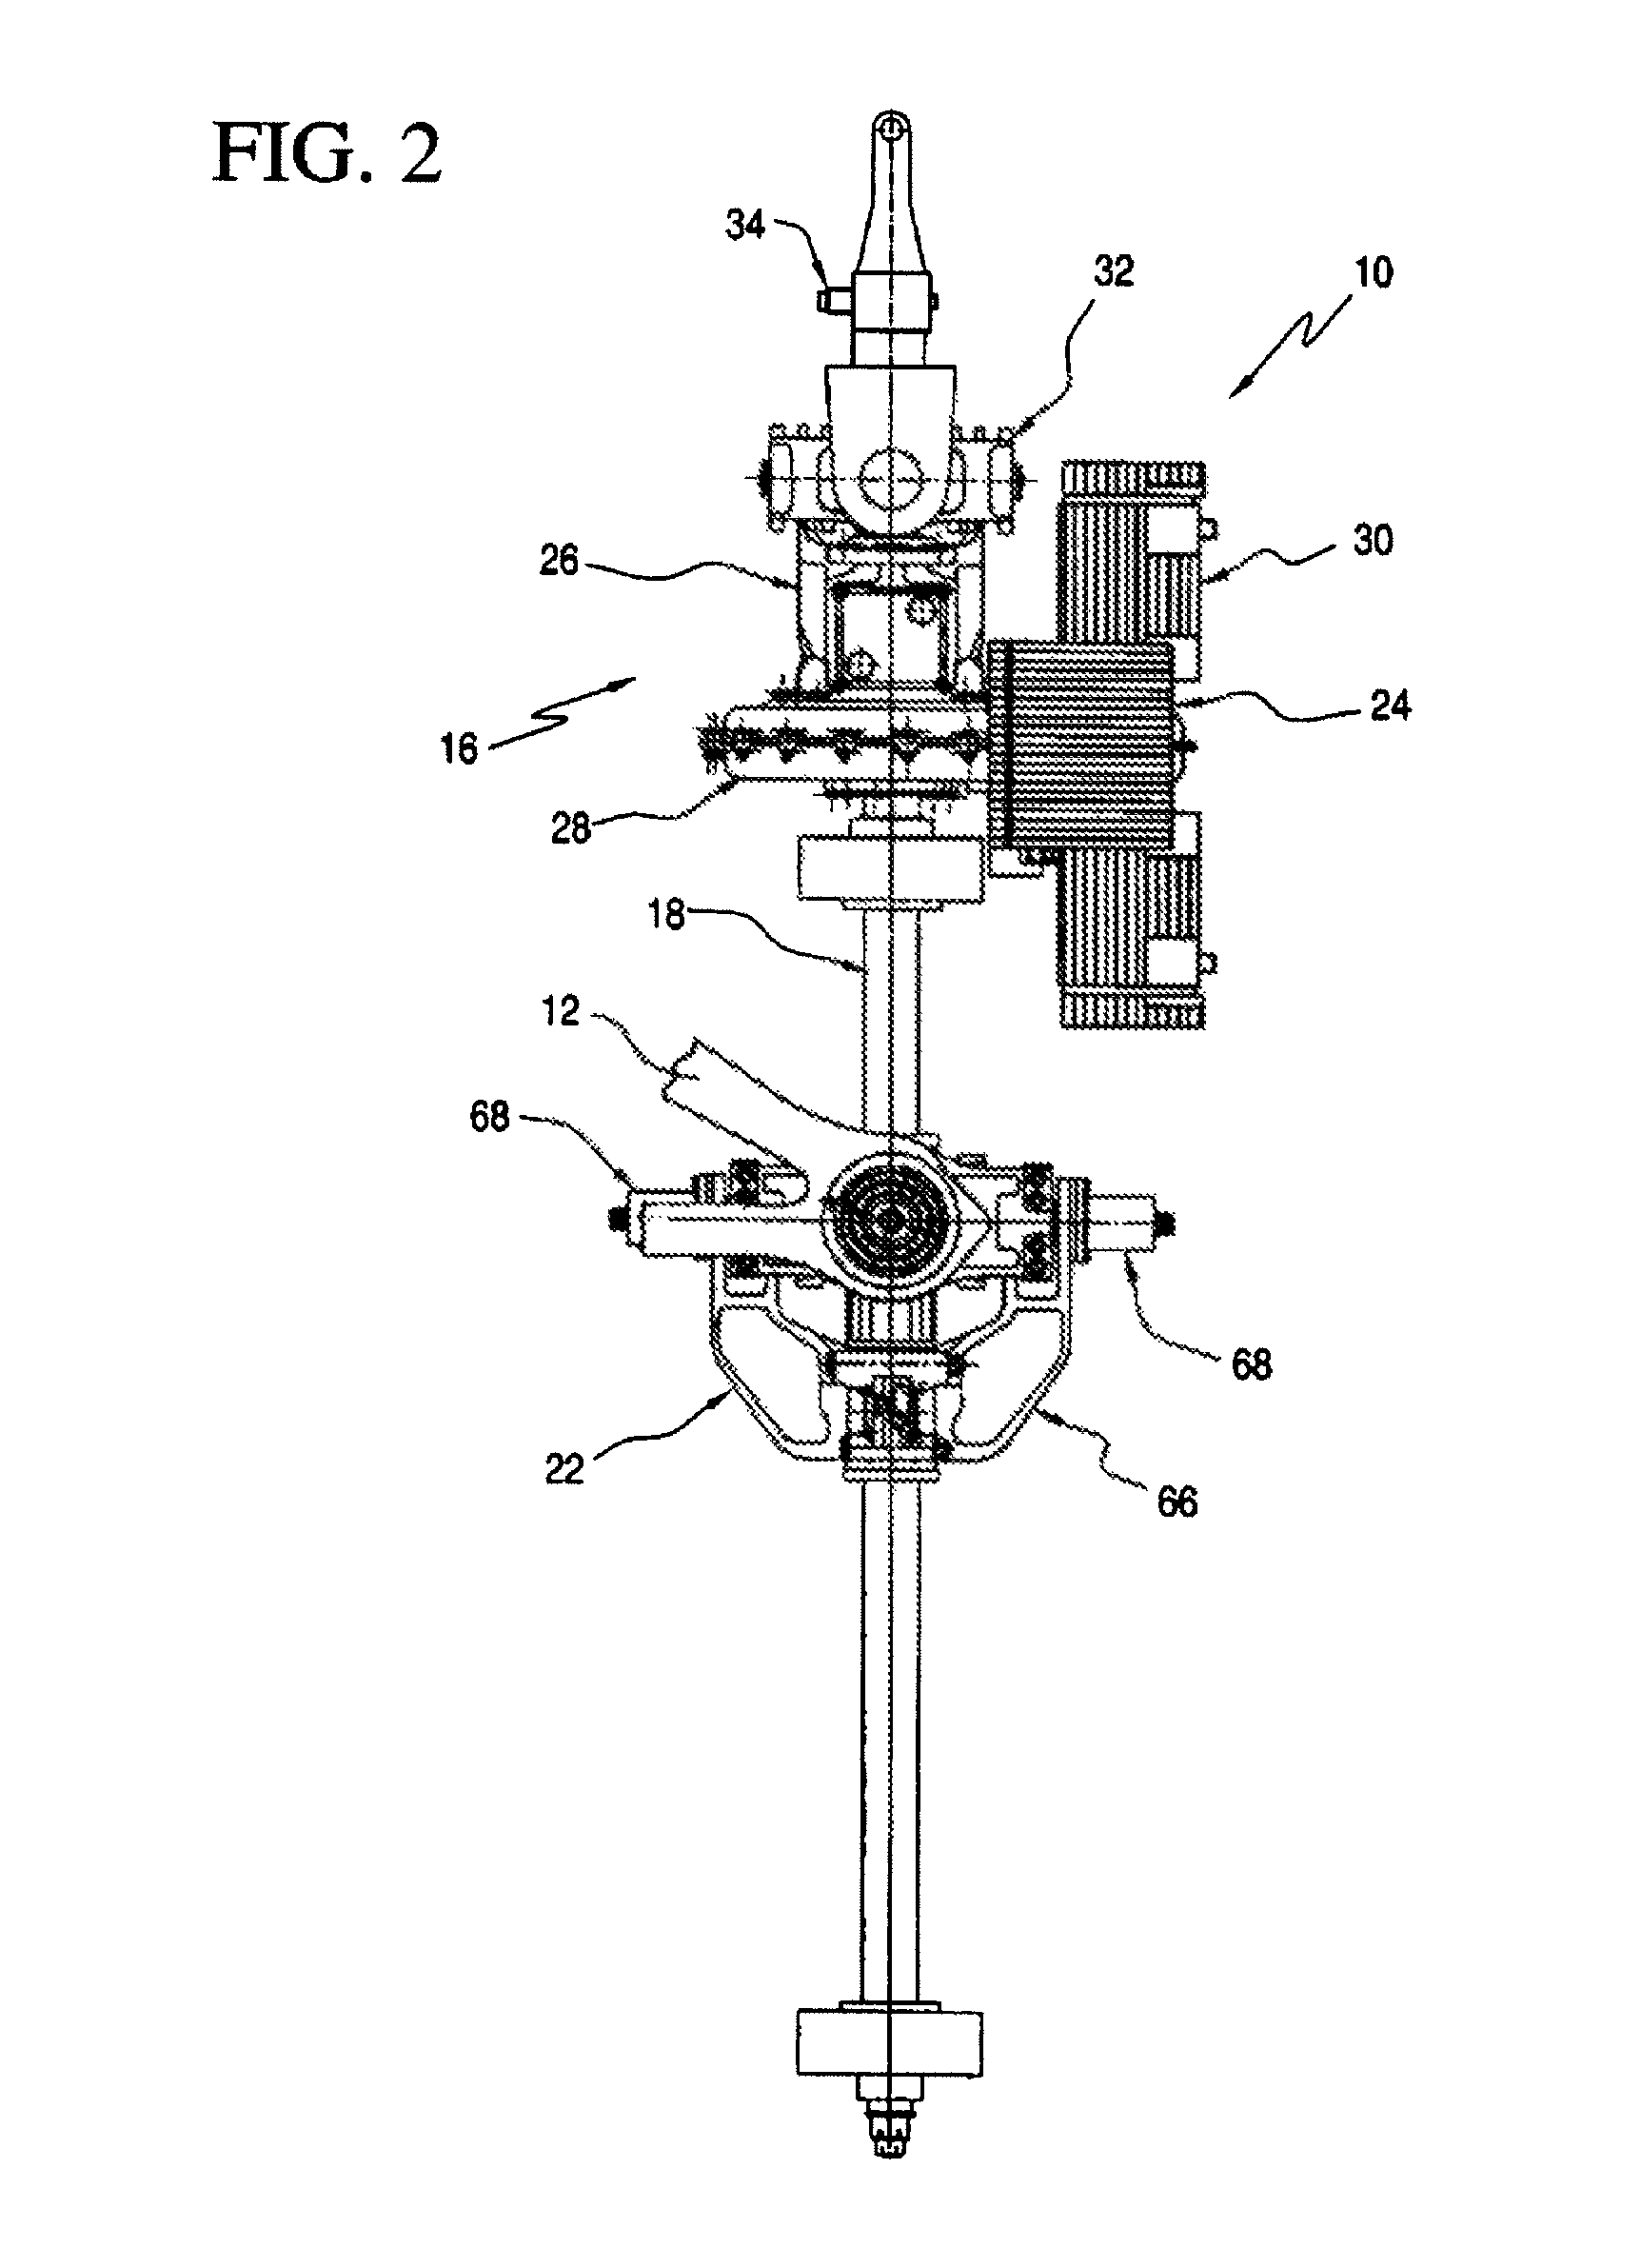 Actuator load path monitoring system